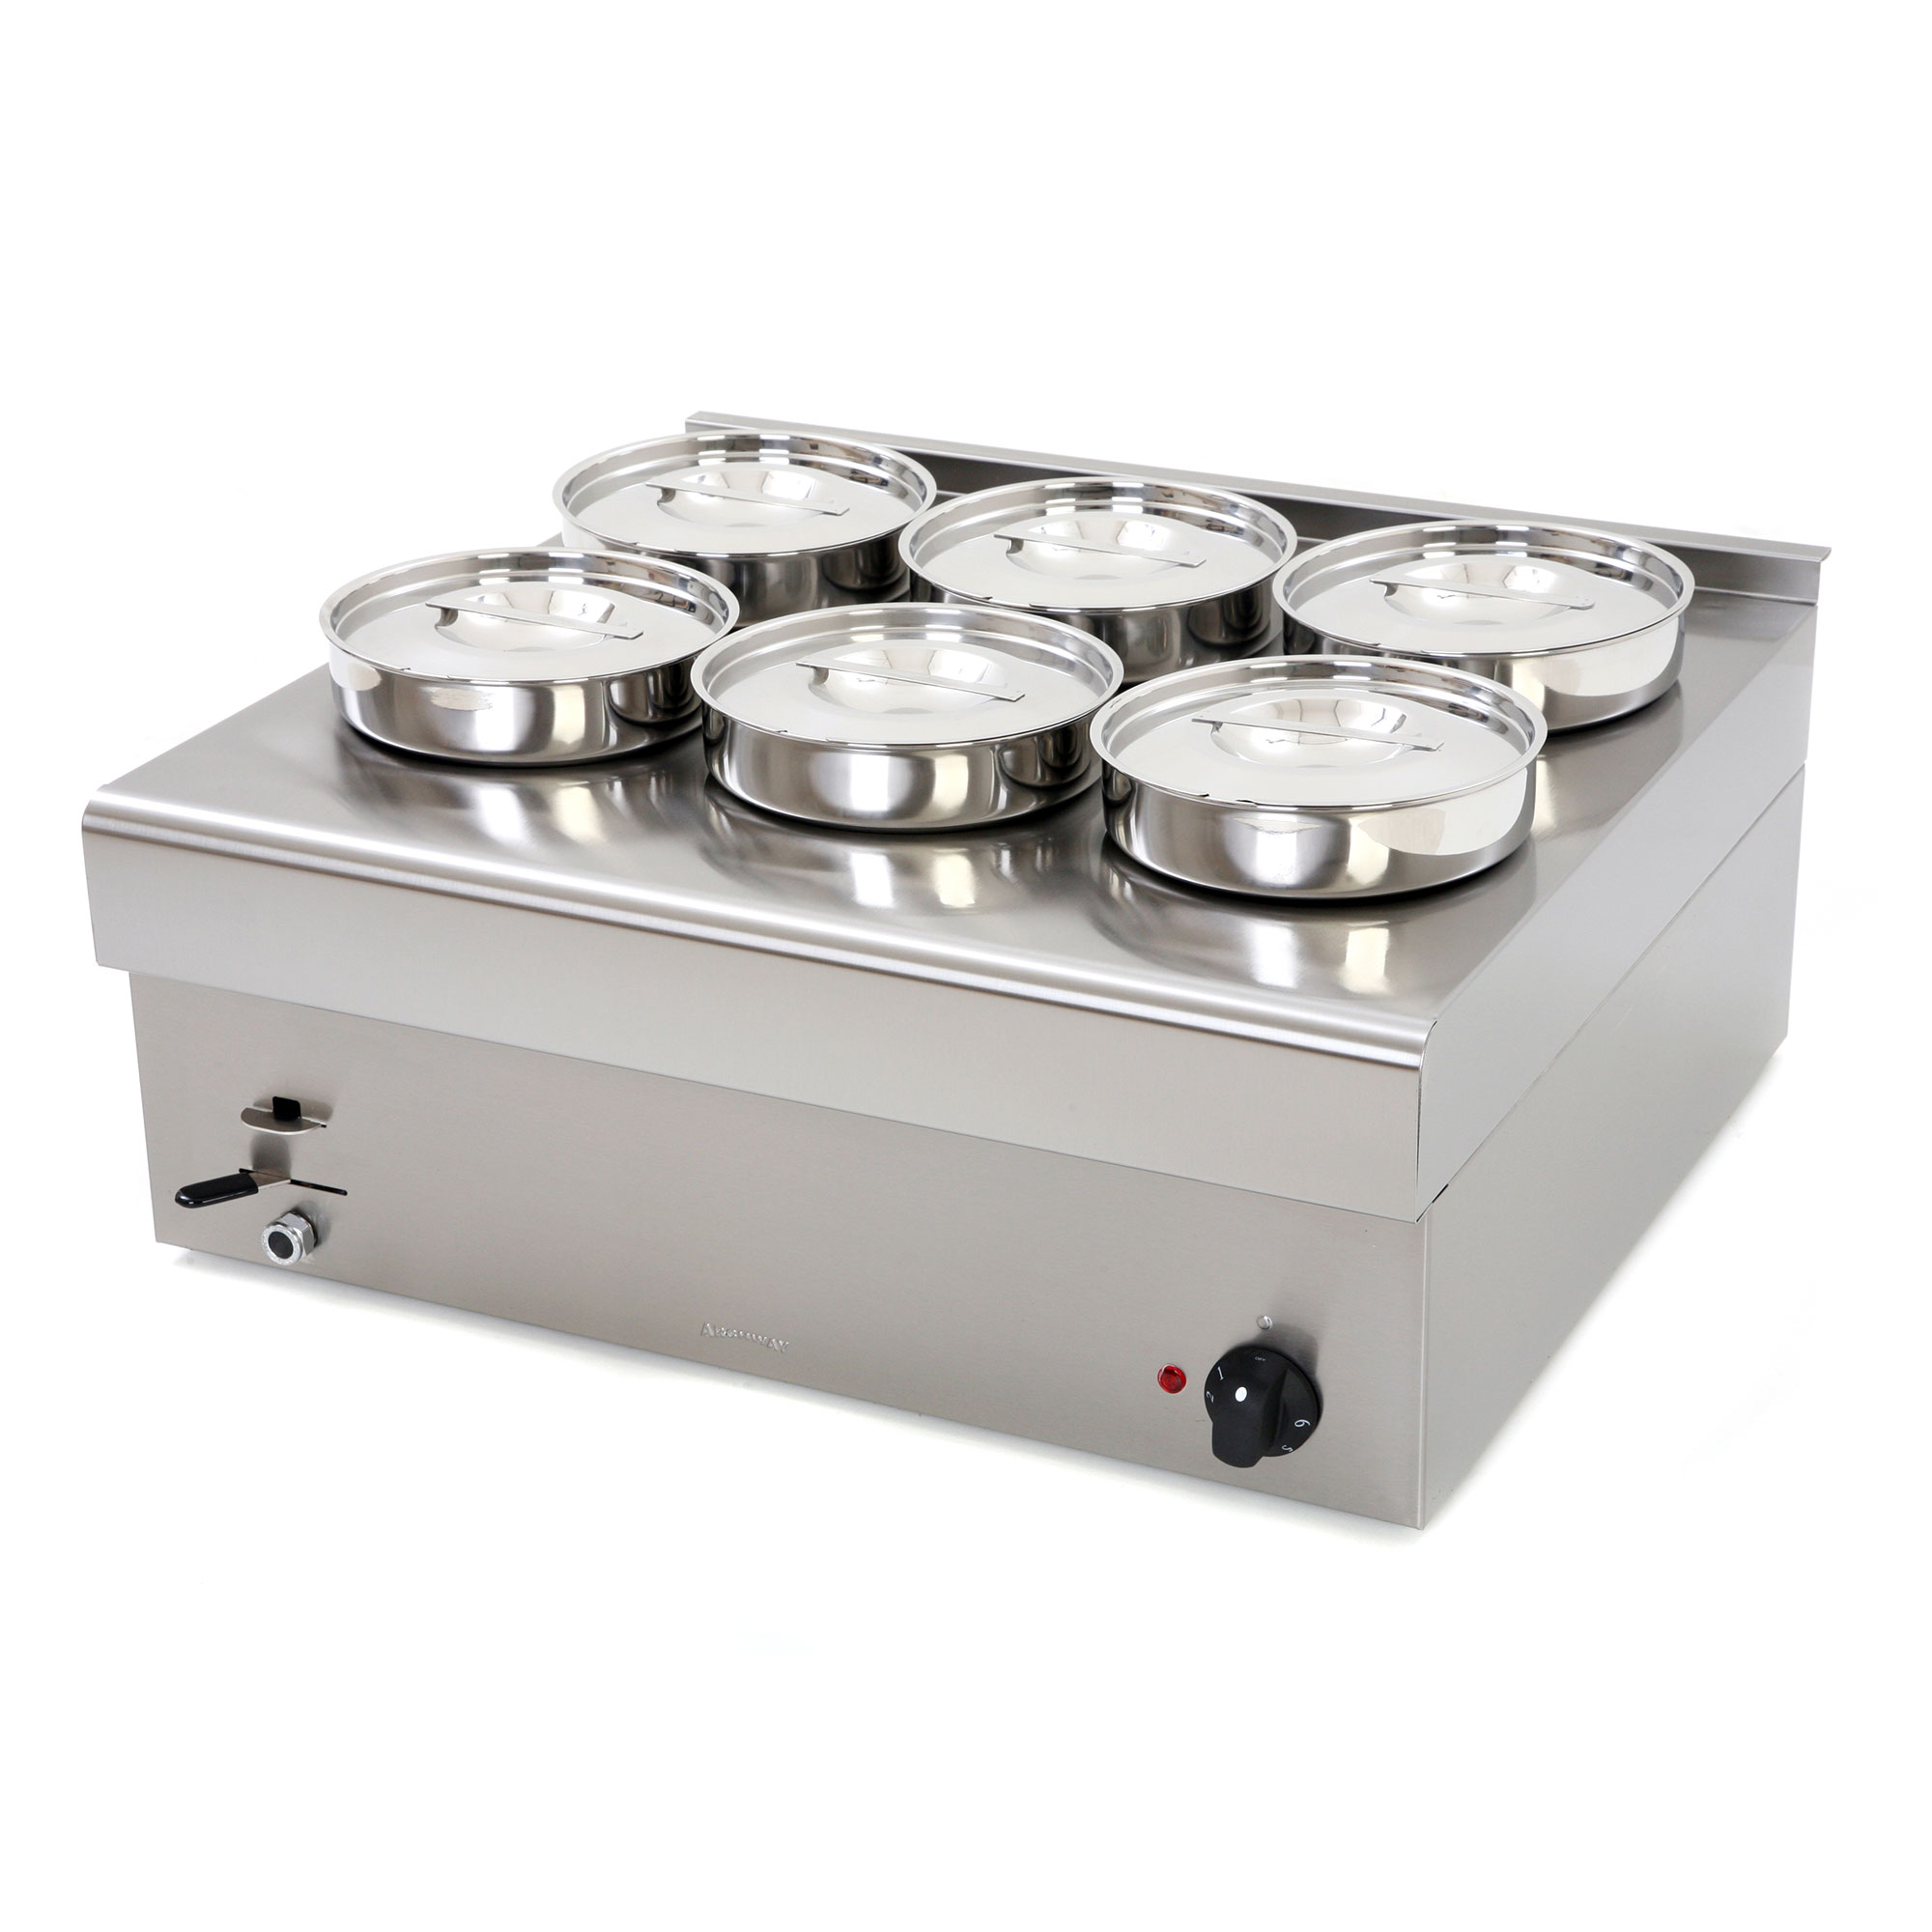 Archway Electric Bains Marie 6 Pots